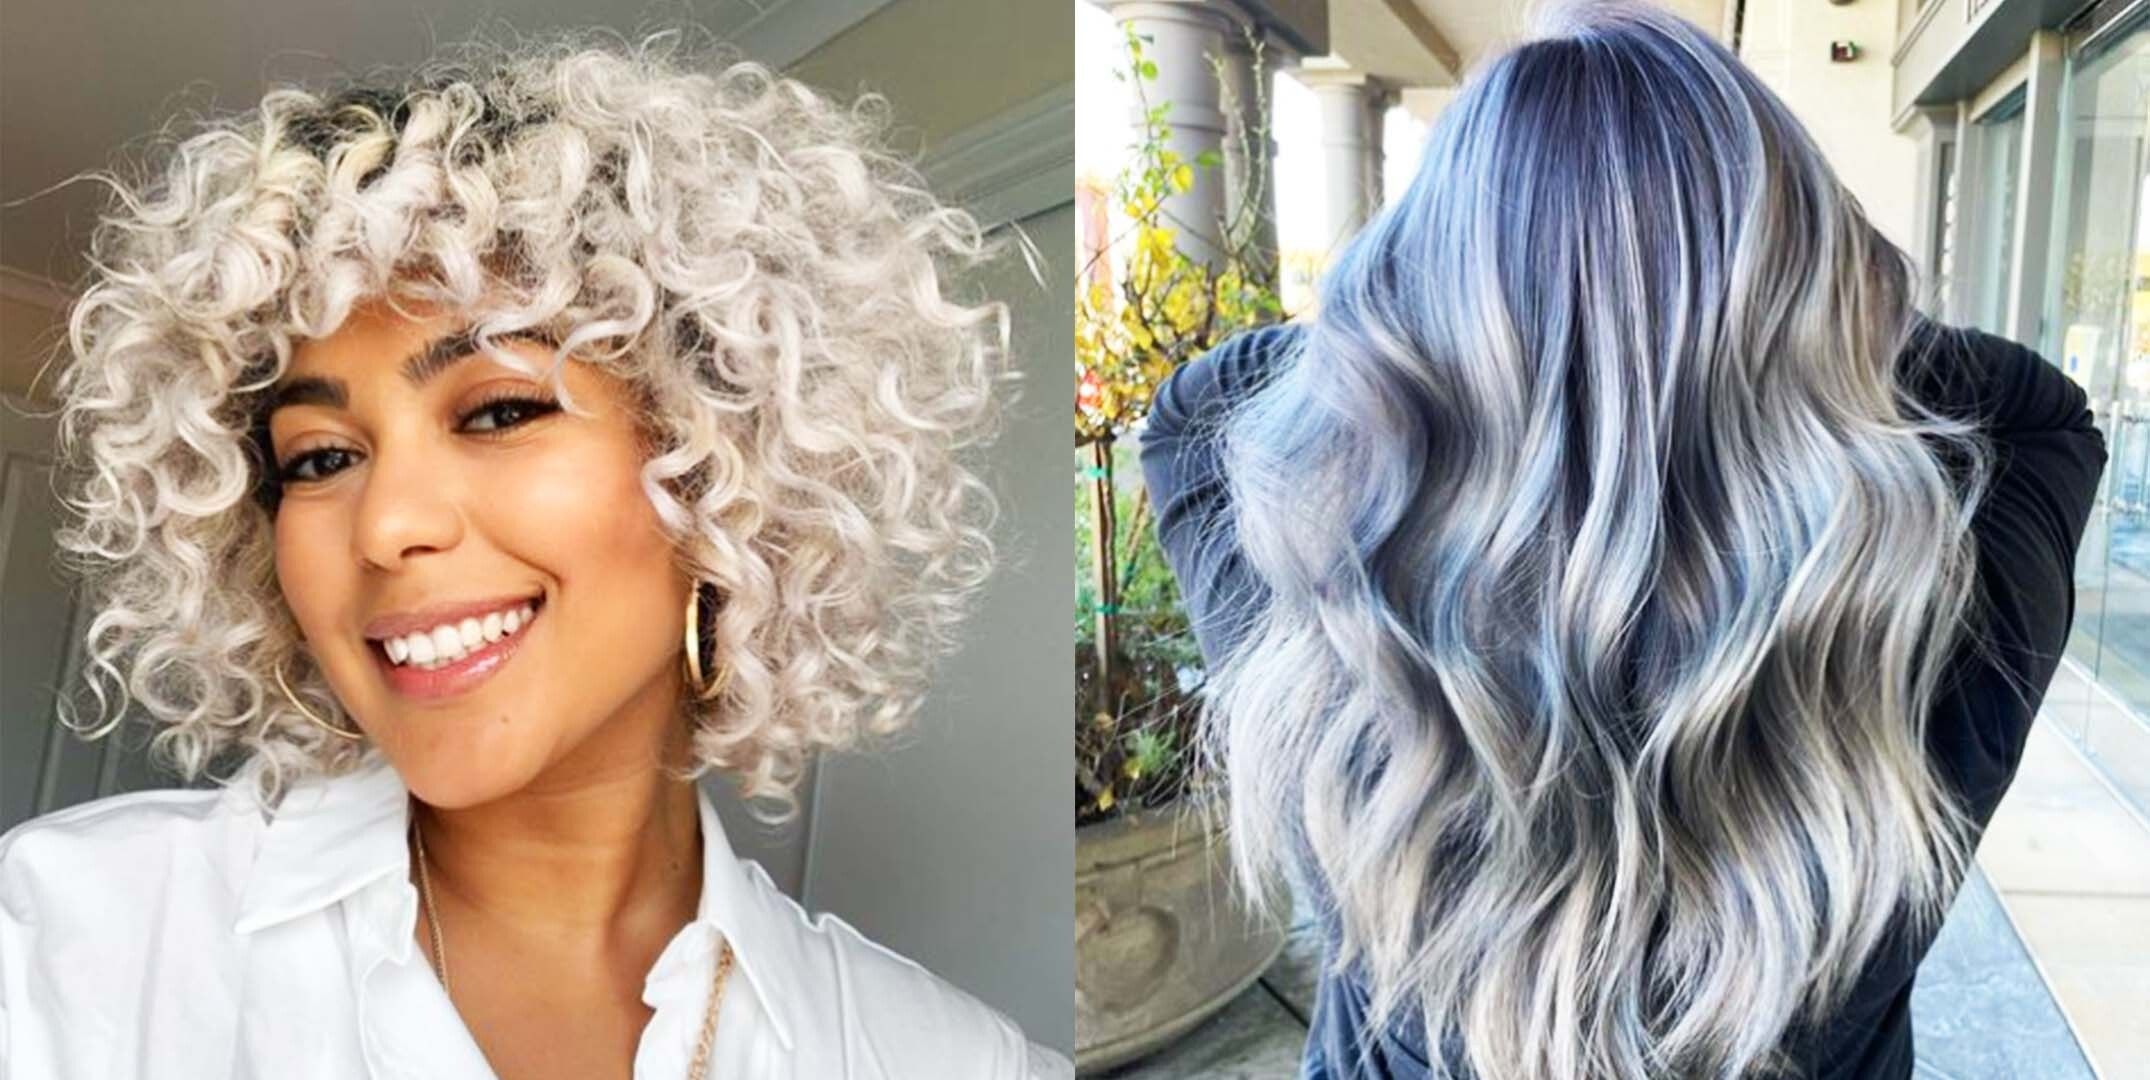 5. 25 Beautiful Blue Hair Color Ideas for Women - StayGlam - wide 6